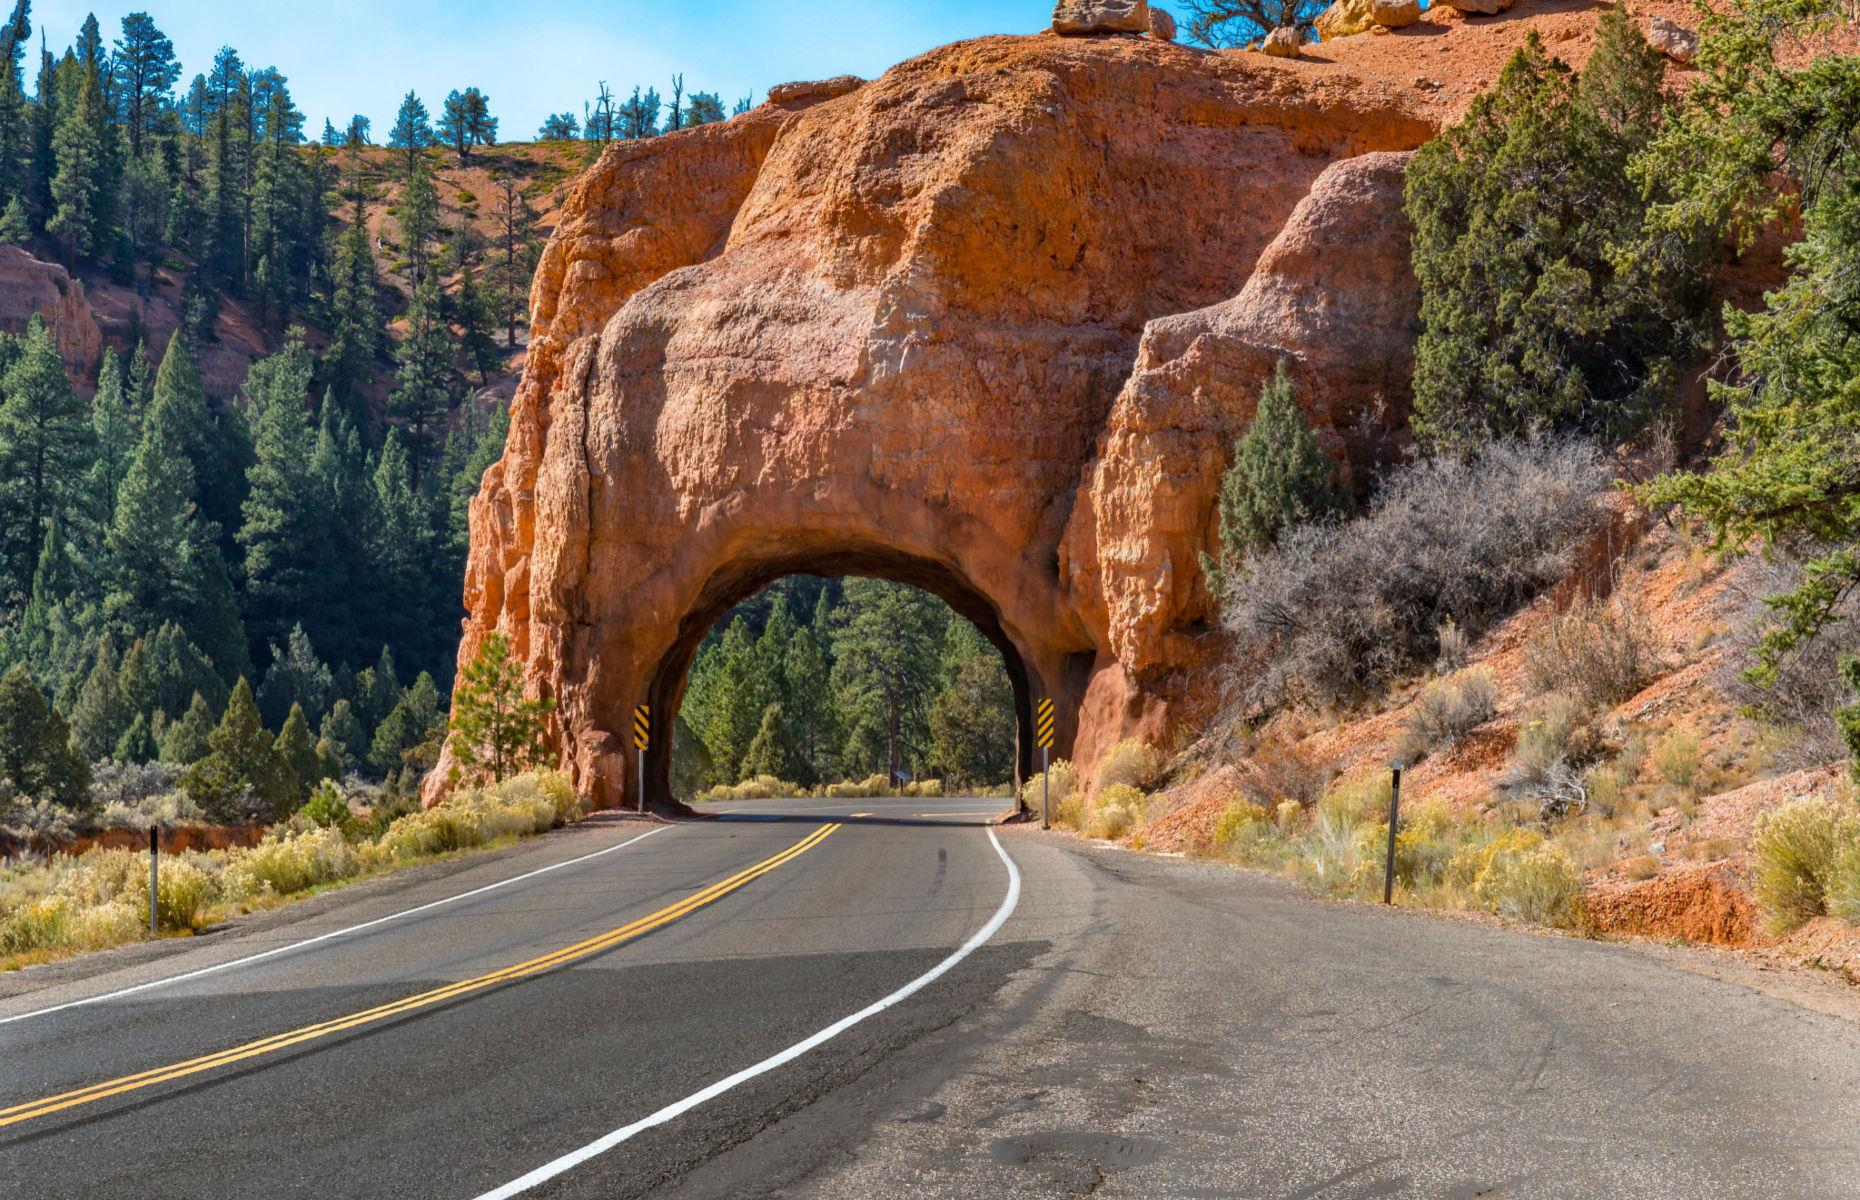 <p>With otherworldly landscapes that evoke any number of sci-fi films or perhaps the planet Mars, <a href="https://www.visitutah.com/articles/the-all-american-road-scenic-byway-12">Scenic Byway 12</a> crams in much of what Utah is famous for: rust-red rocks, arches, hoodoos and slot canyons. There’s a lot to explore, whether kids are interested in learning about the fascinating geology or just want to skip through wavy rock structures and enjoy incredible places like the fossil-filled Escalante Petrified Forest.</p>  <p><a href="https://www.loveexploring.com/gallerylist/100304/40-places-you-wont-believe-are-on-earth"><strong>You won't believe these 40 places are on Earth</strong></a></p>